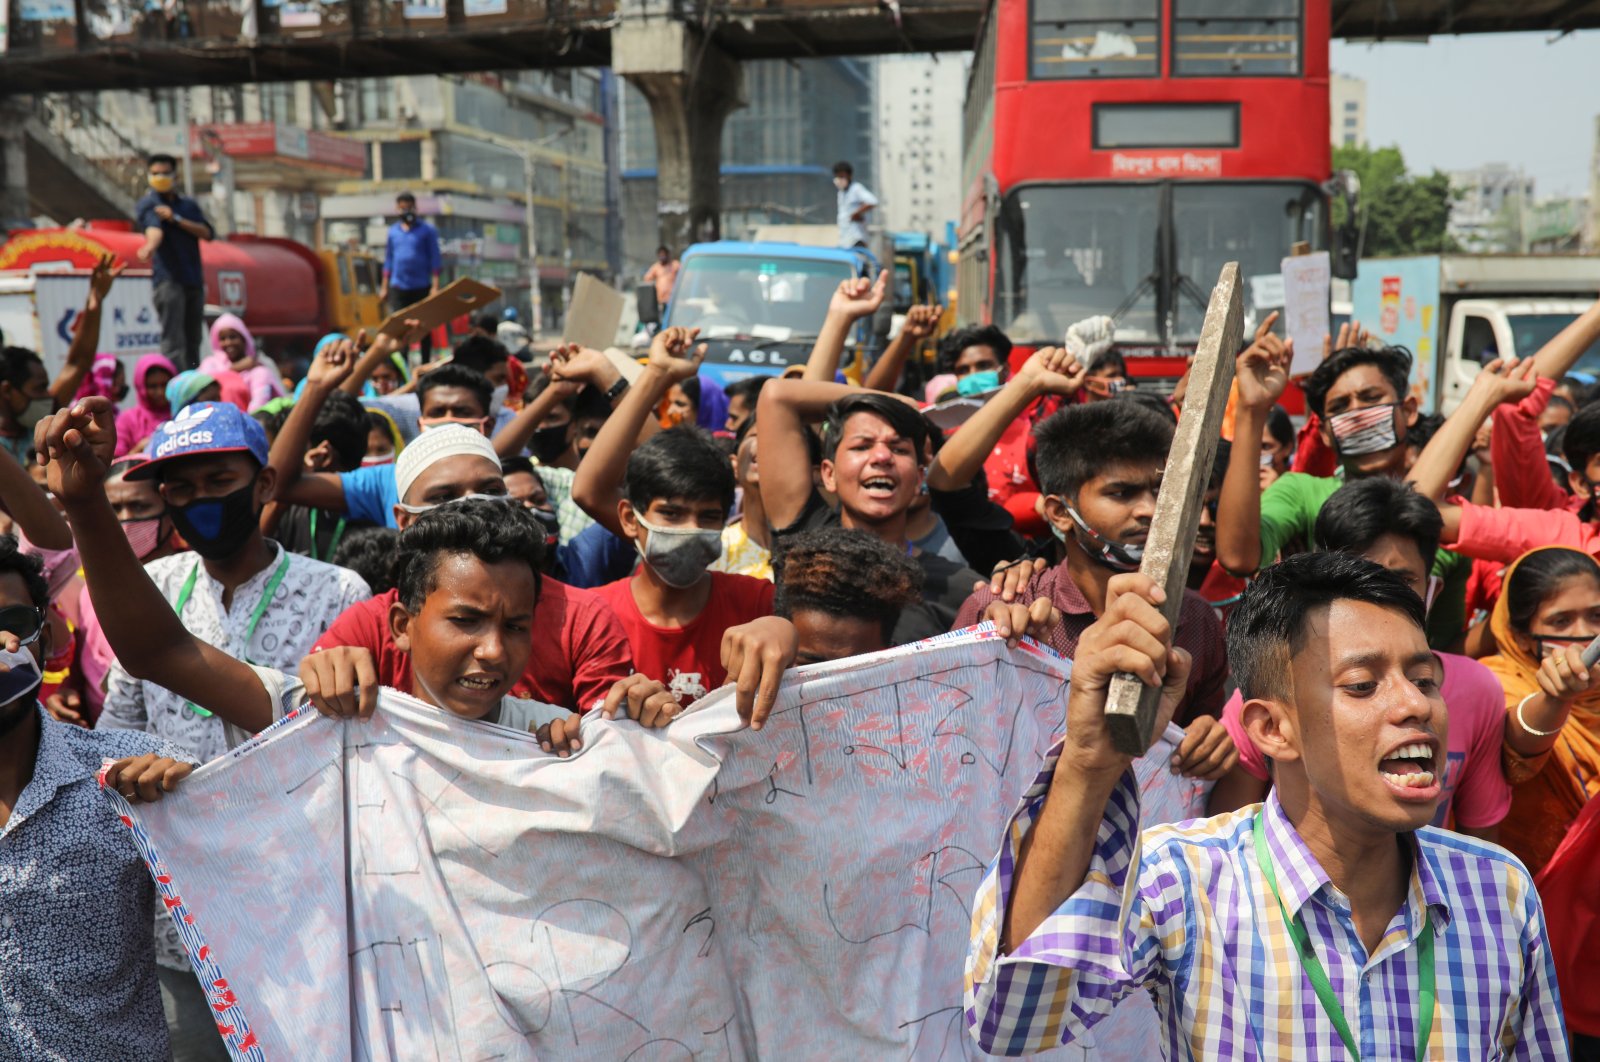 Garment workers block a road demanding their due wages during the lockdown amid concerns over the coronavirus disease (COVID-19) outbreak in Dhaka, Bangladesh, April 13, 2020. (Reuters Photo)